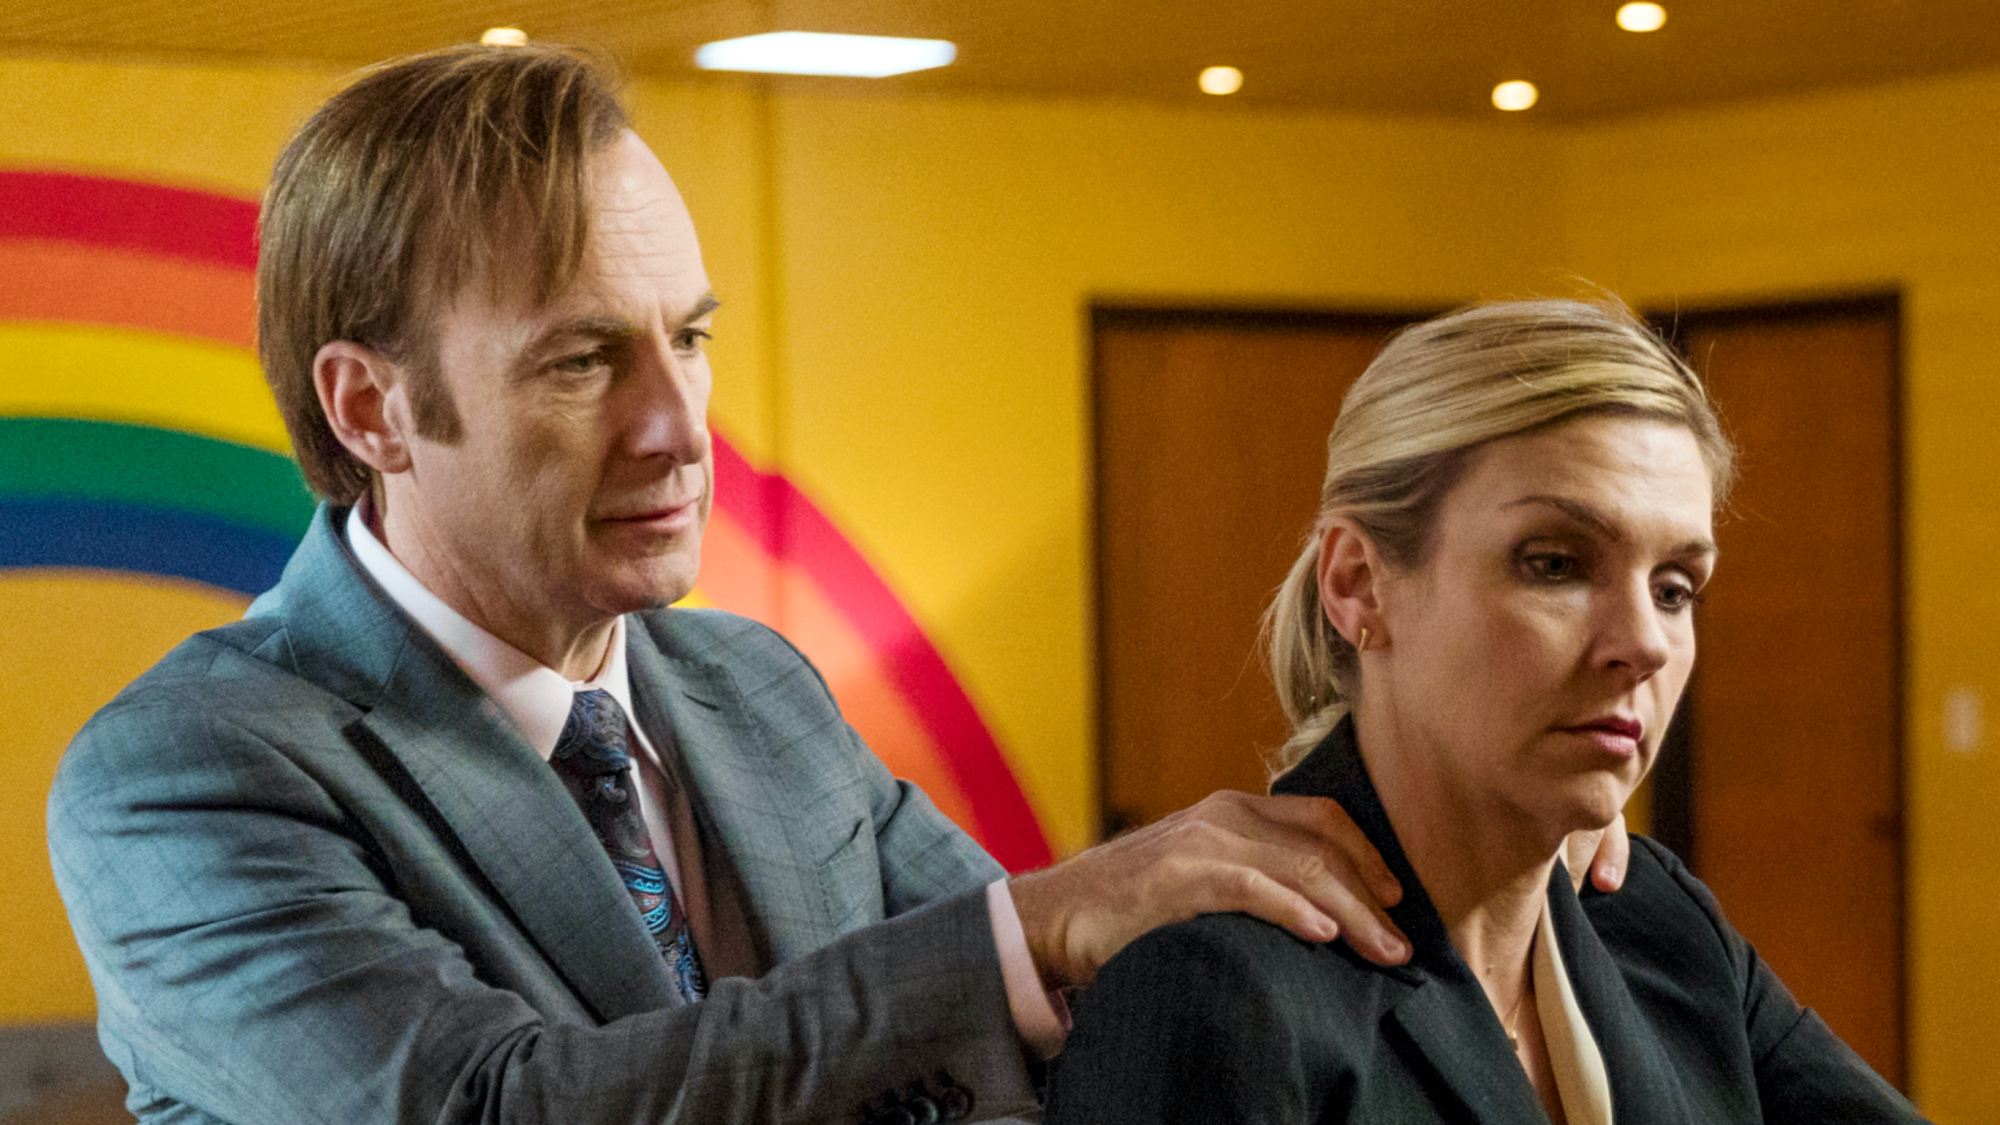 How to watch Better Call Saul season 6 online right now: Release date and time